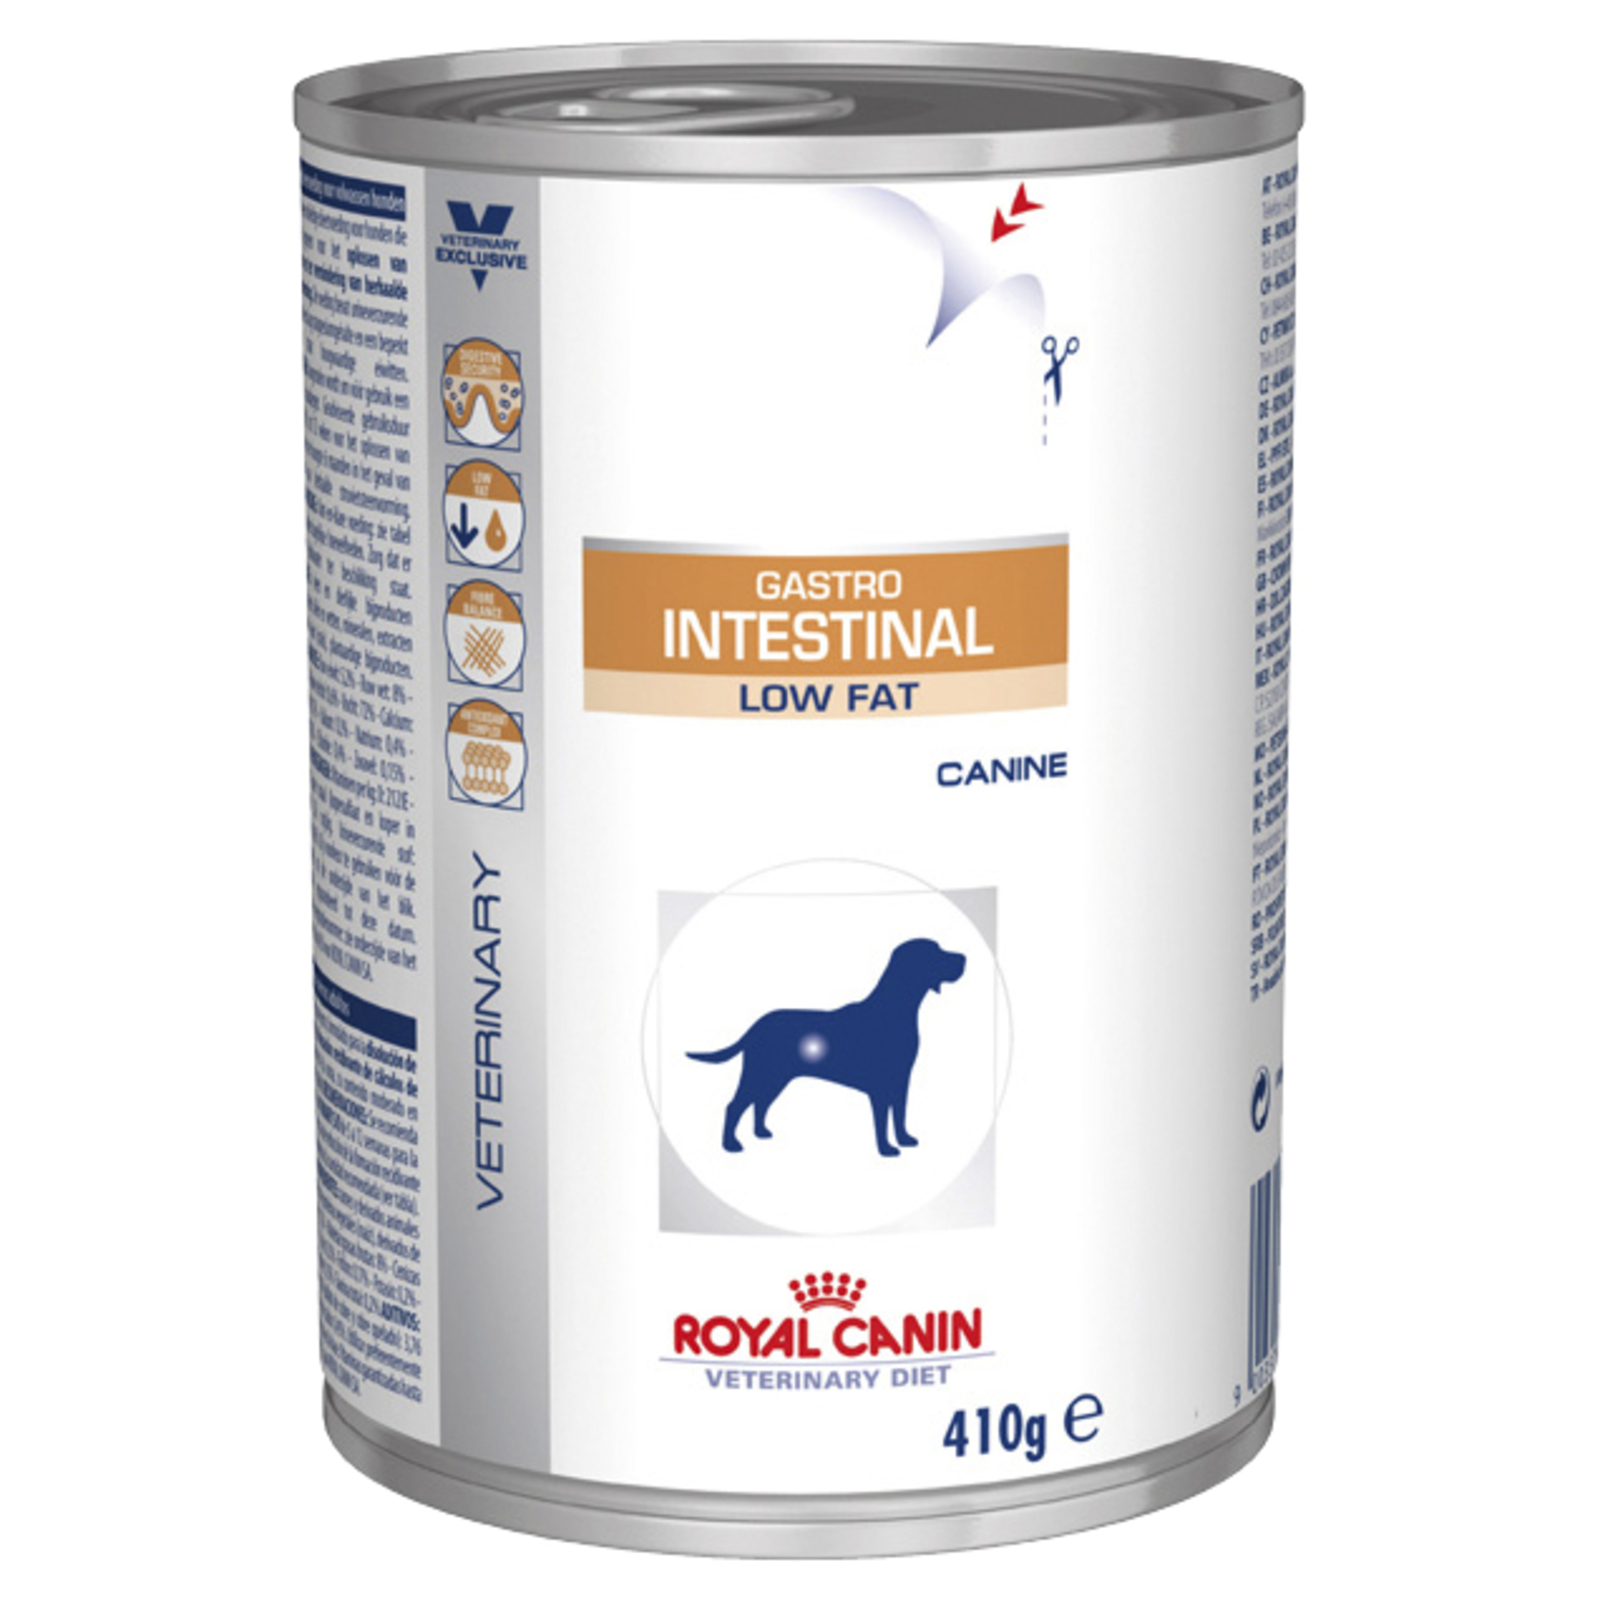 Royal Canin Gastro Intestinal Low Fat Can Dog Food